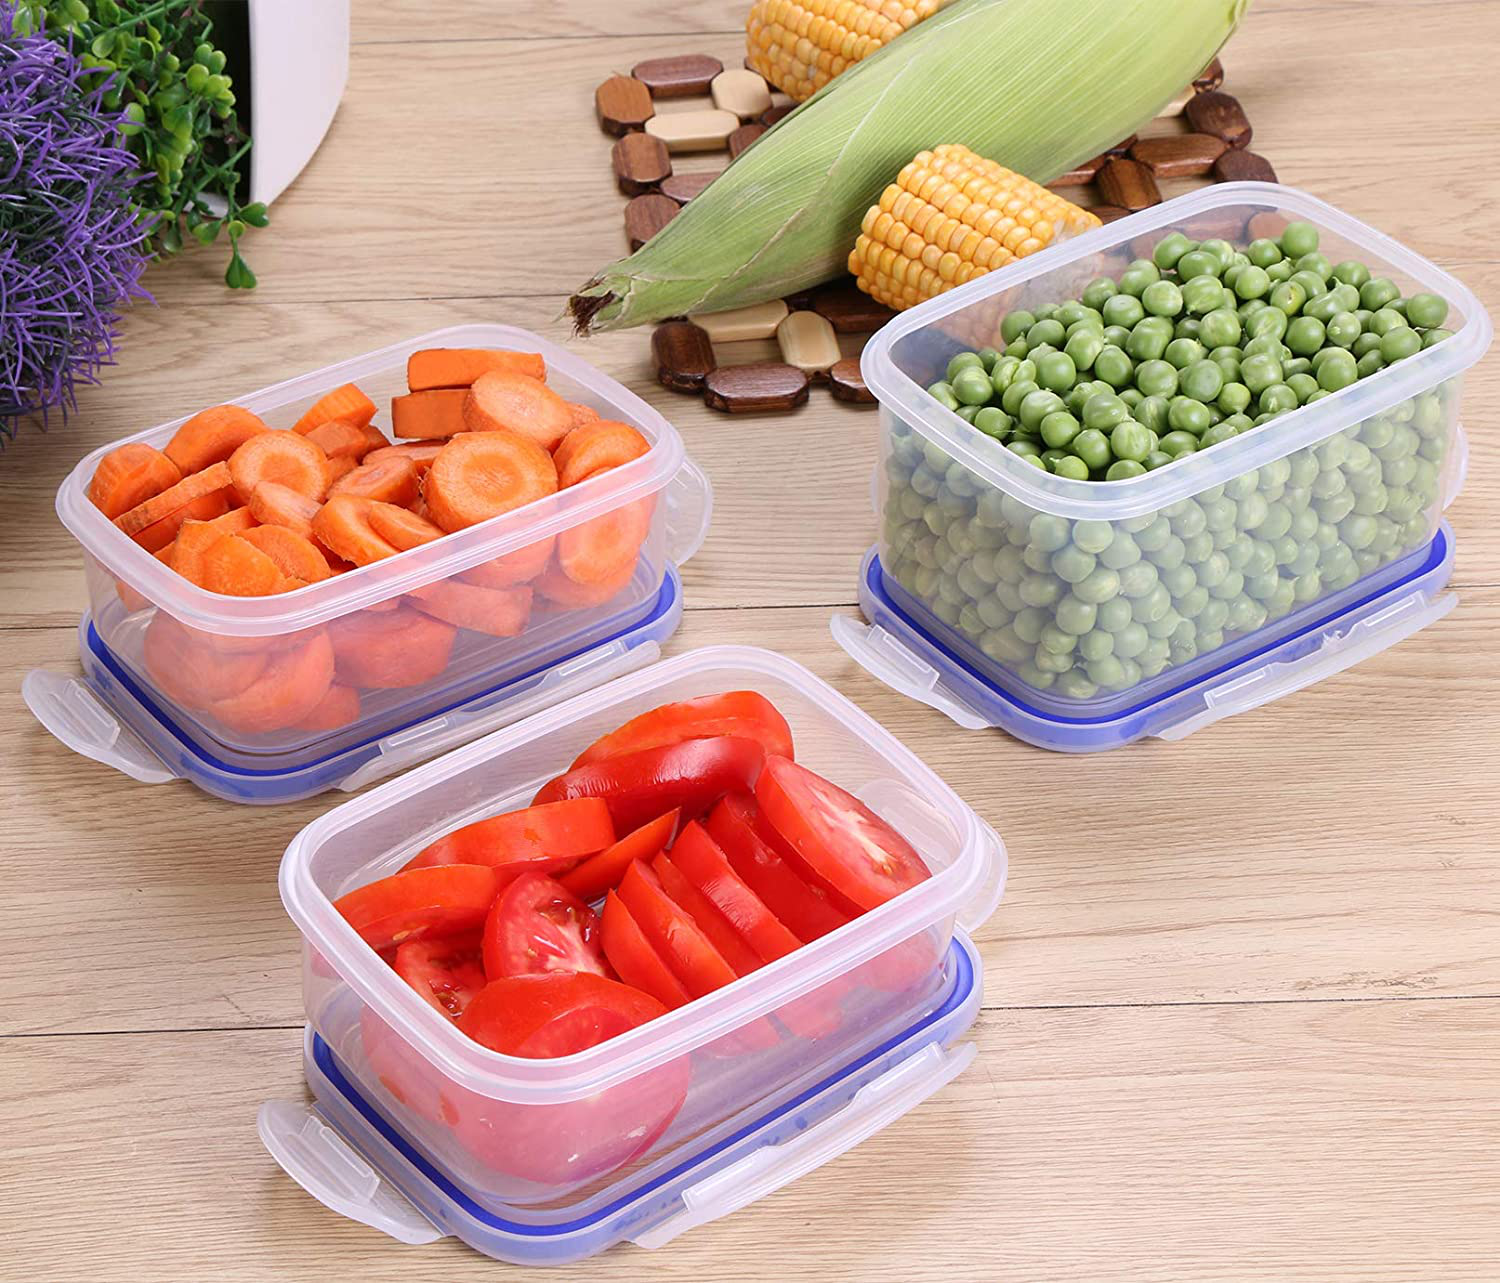  Utopia Kitchen Glass Food Storage Container Set - 18 Pieces (9  Containers and 9 Lids) - Transparent Lids (Grey, 18 Piece Set): Home &  Kitchen